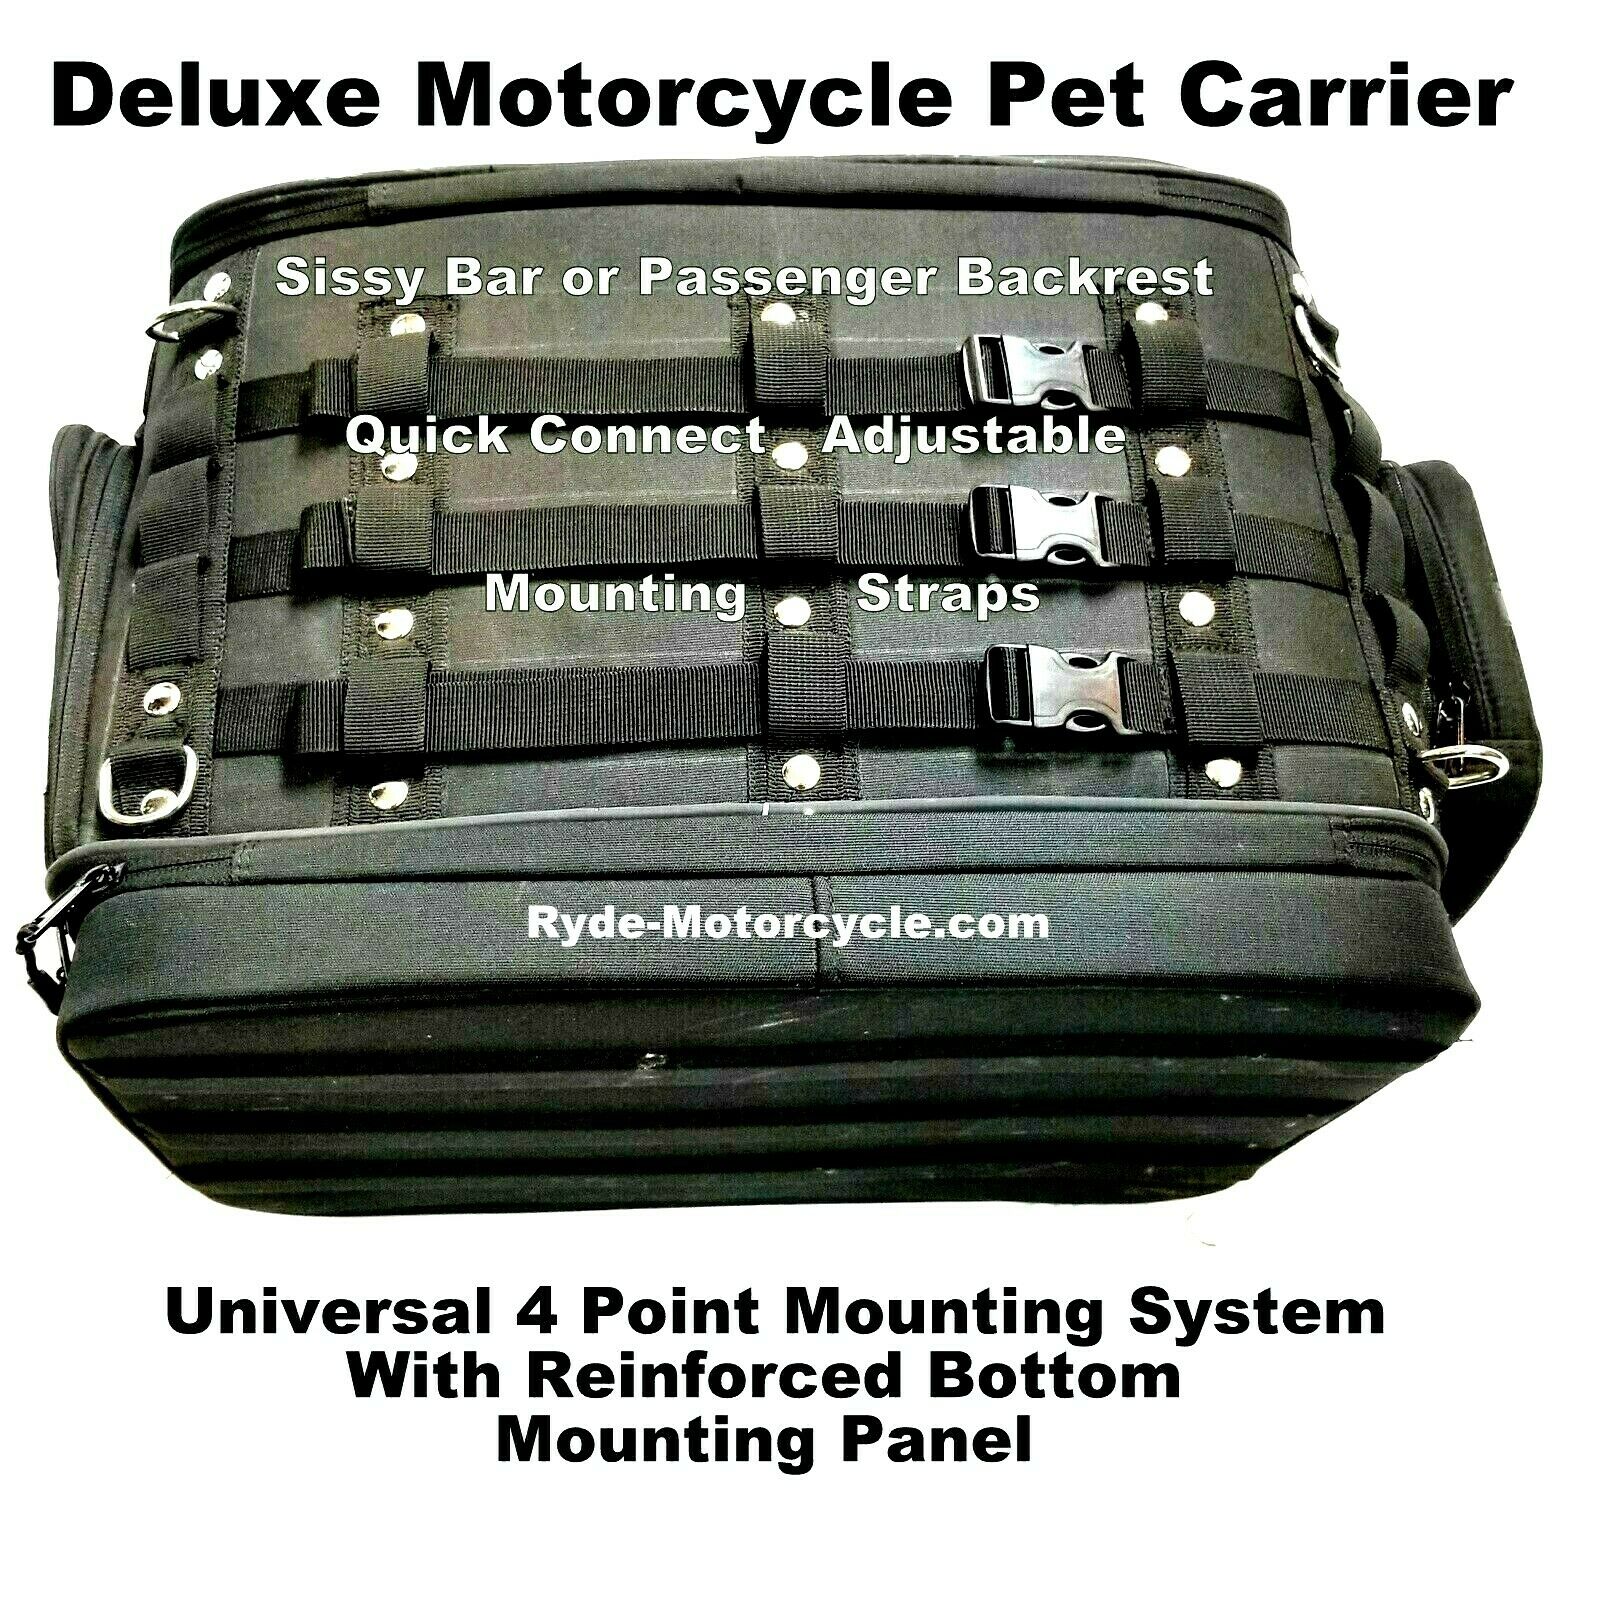 Moto-Pet Deluxe Full Feature Motorcycle Pet Carrier Mount on Rack Seat Sissy Bar